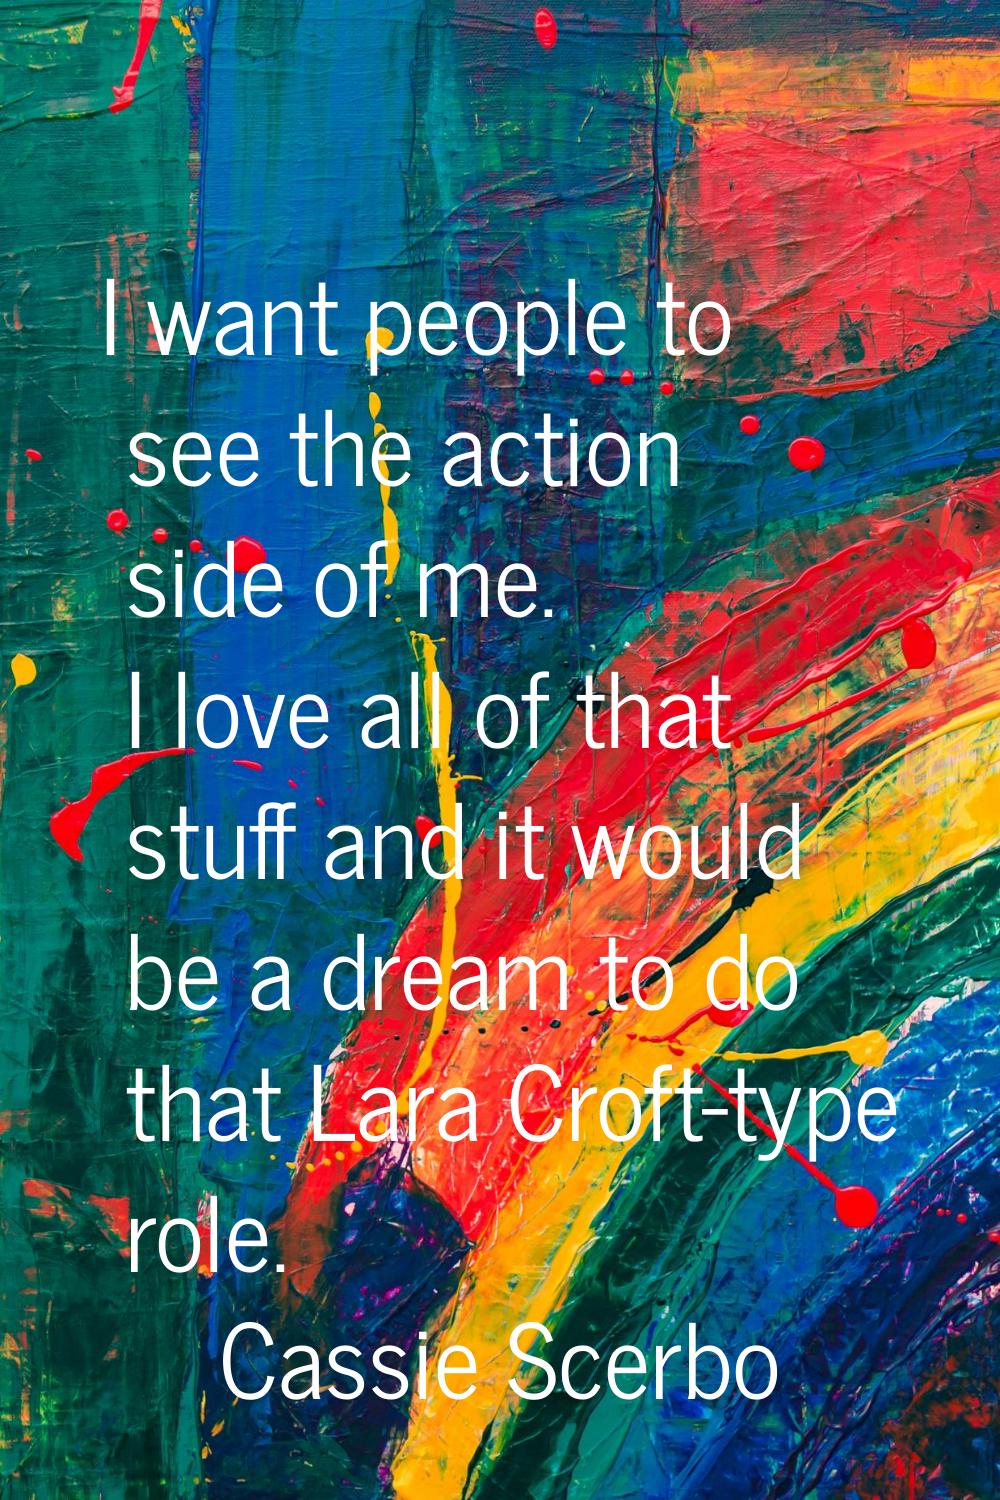 I want people to see the action side of me. I love all of that stuff and it would be a dream to do 